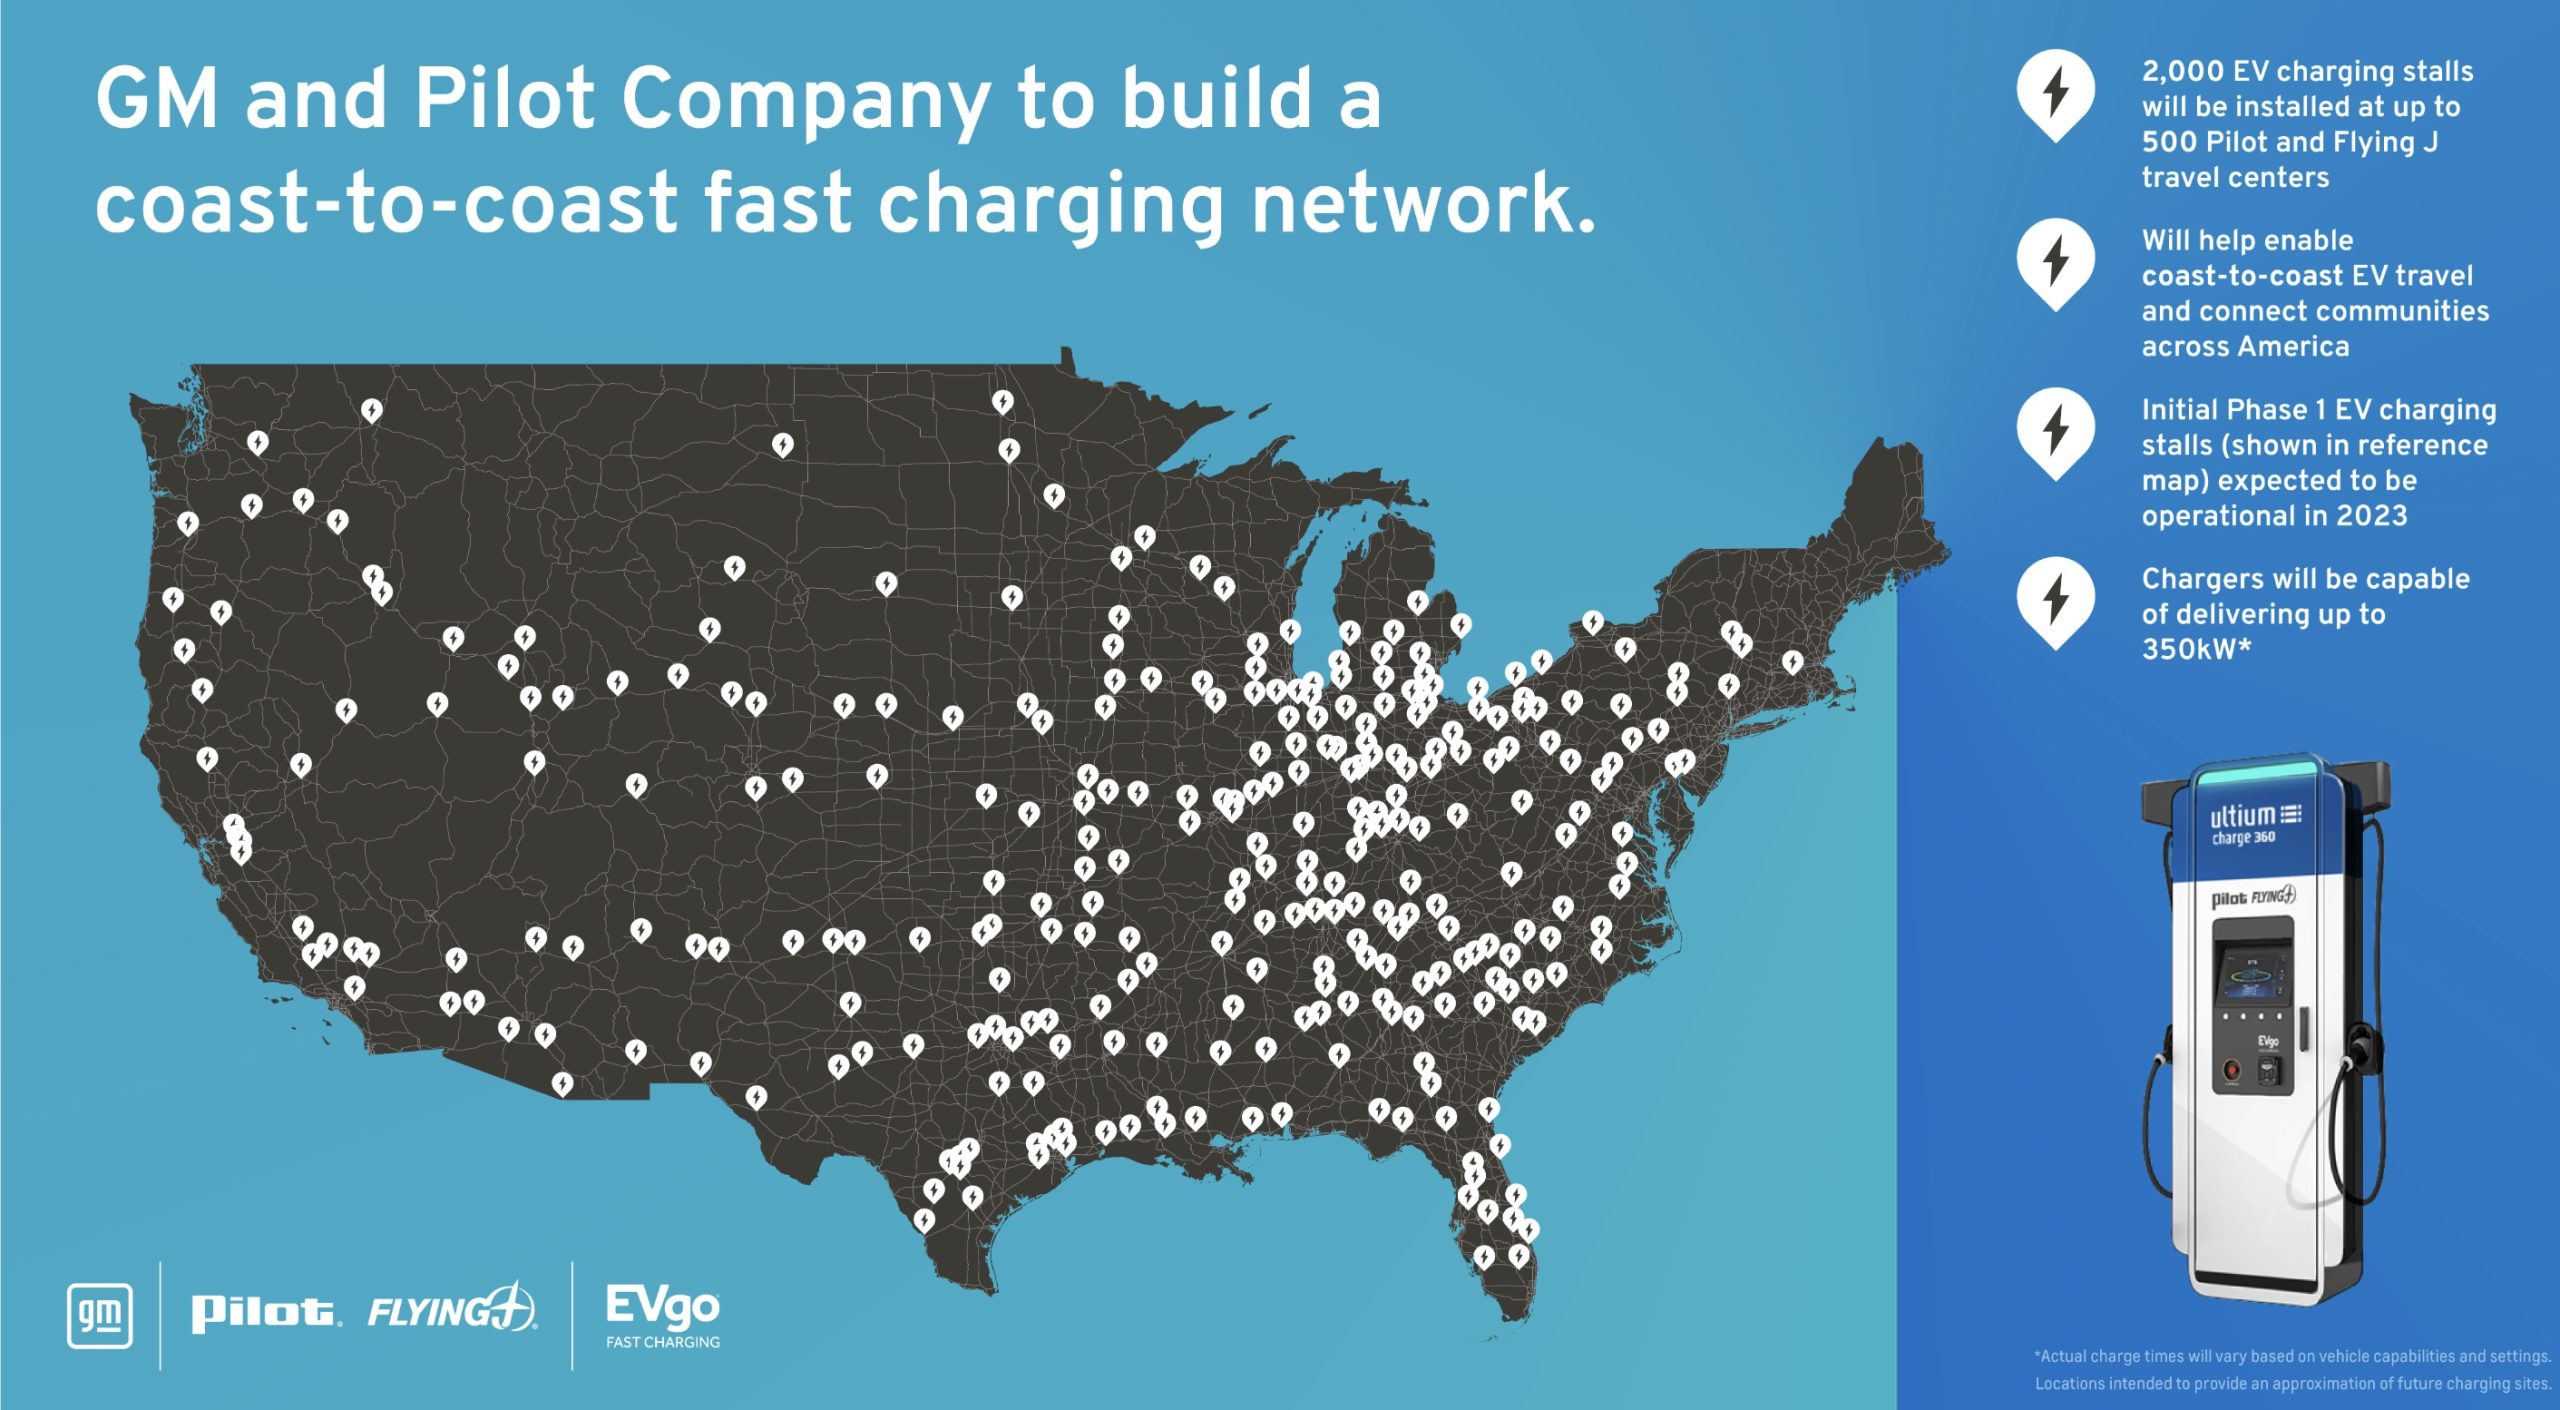 General Motors opens first locations in national EV fast-charging network